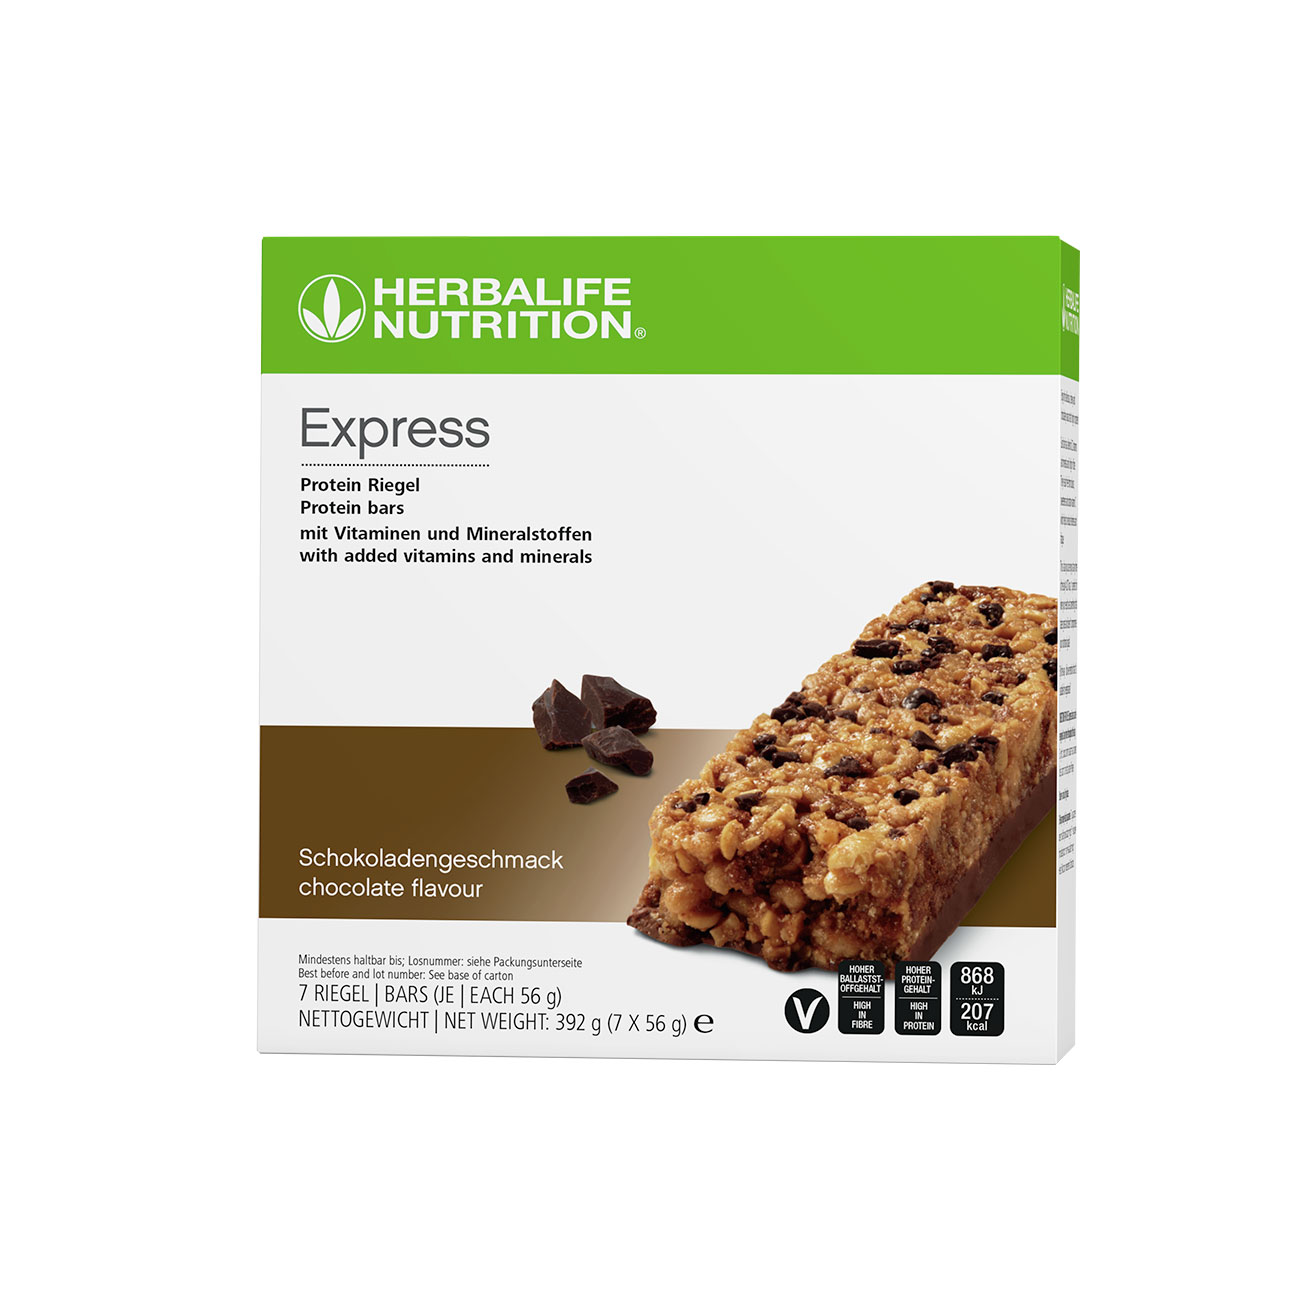 Express Protein Bars  Chocolate product shot